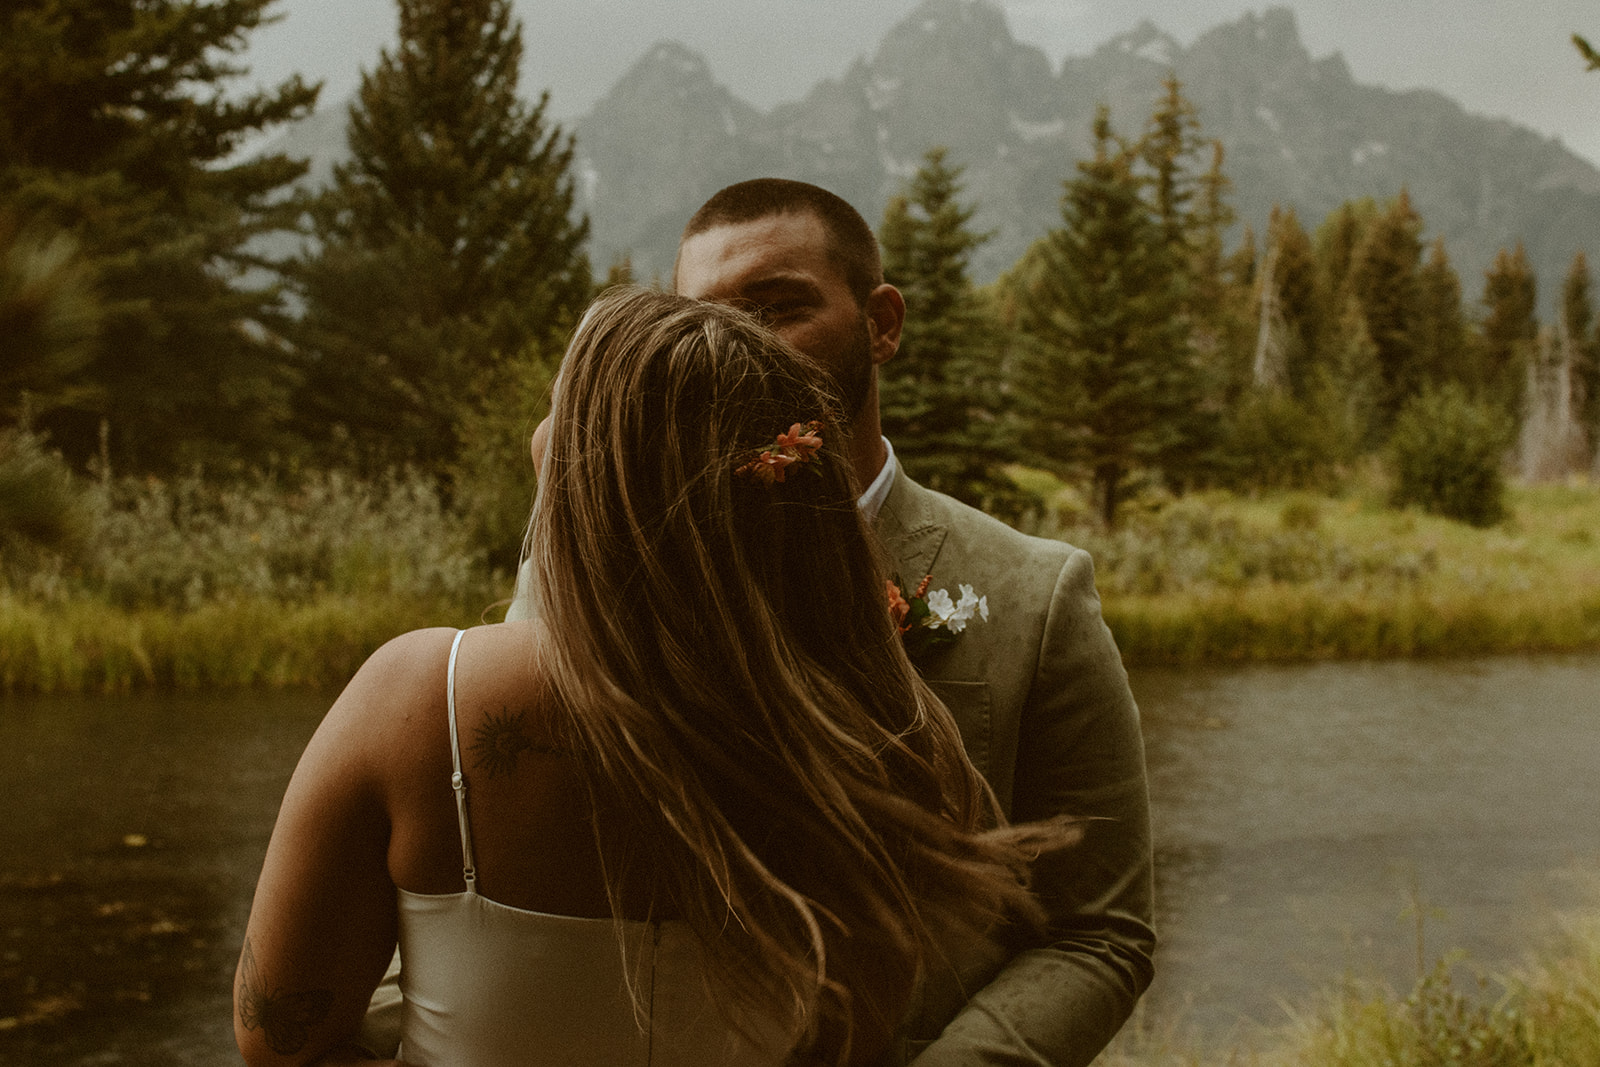 Intimate Elopement at Snake River Overlook in Grand Teton National Park